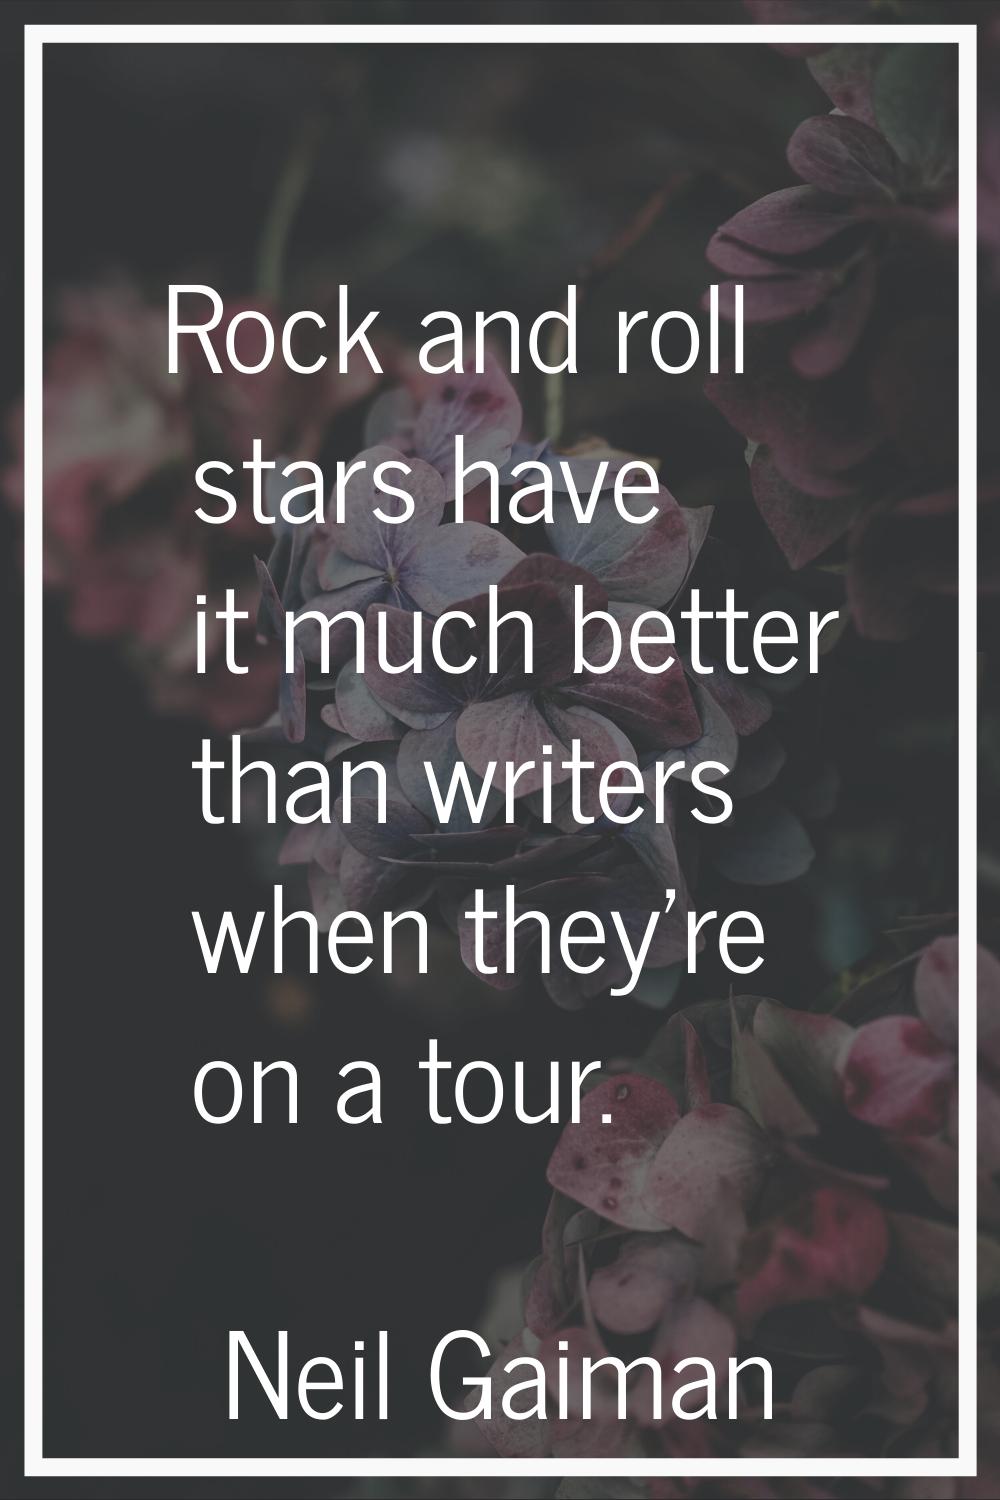 Rock and roll stars have it much better than writers when they're on a tour.